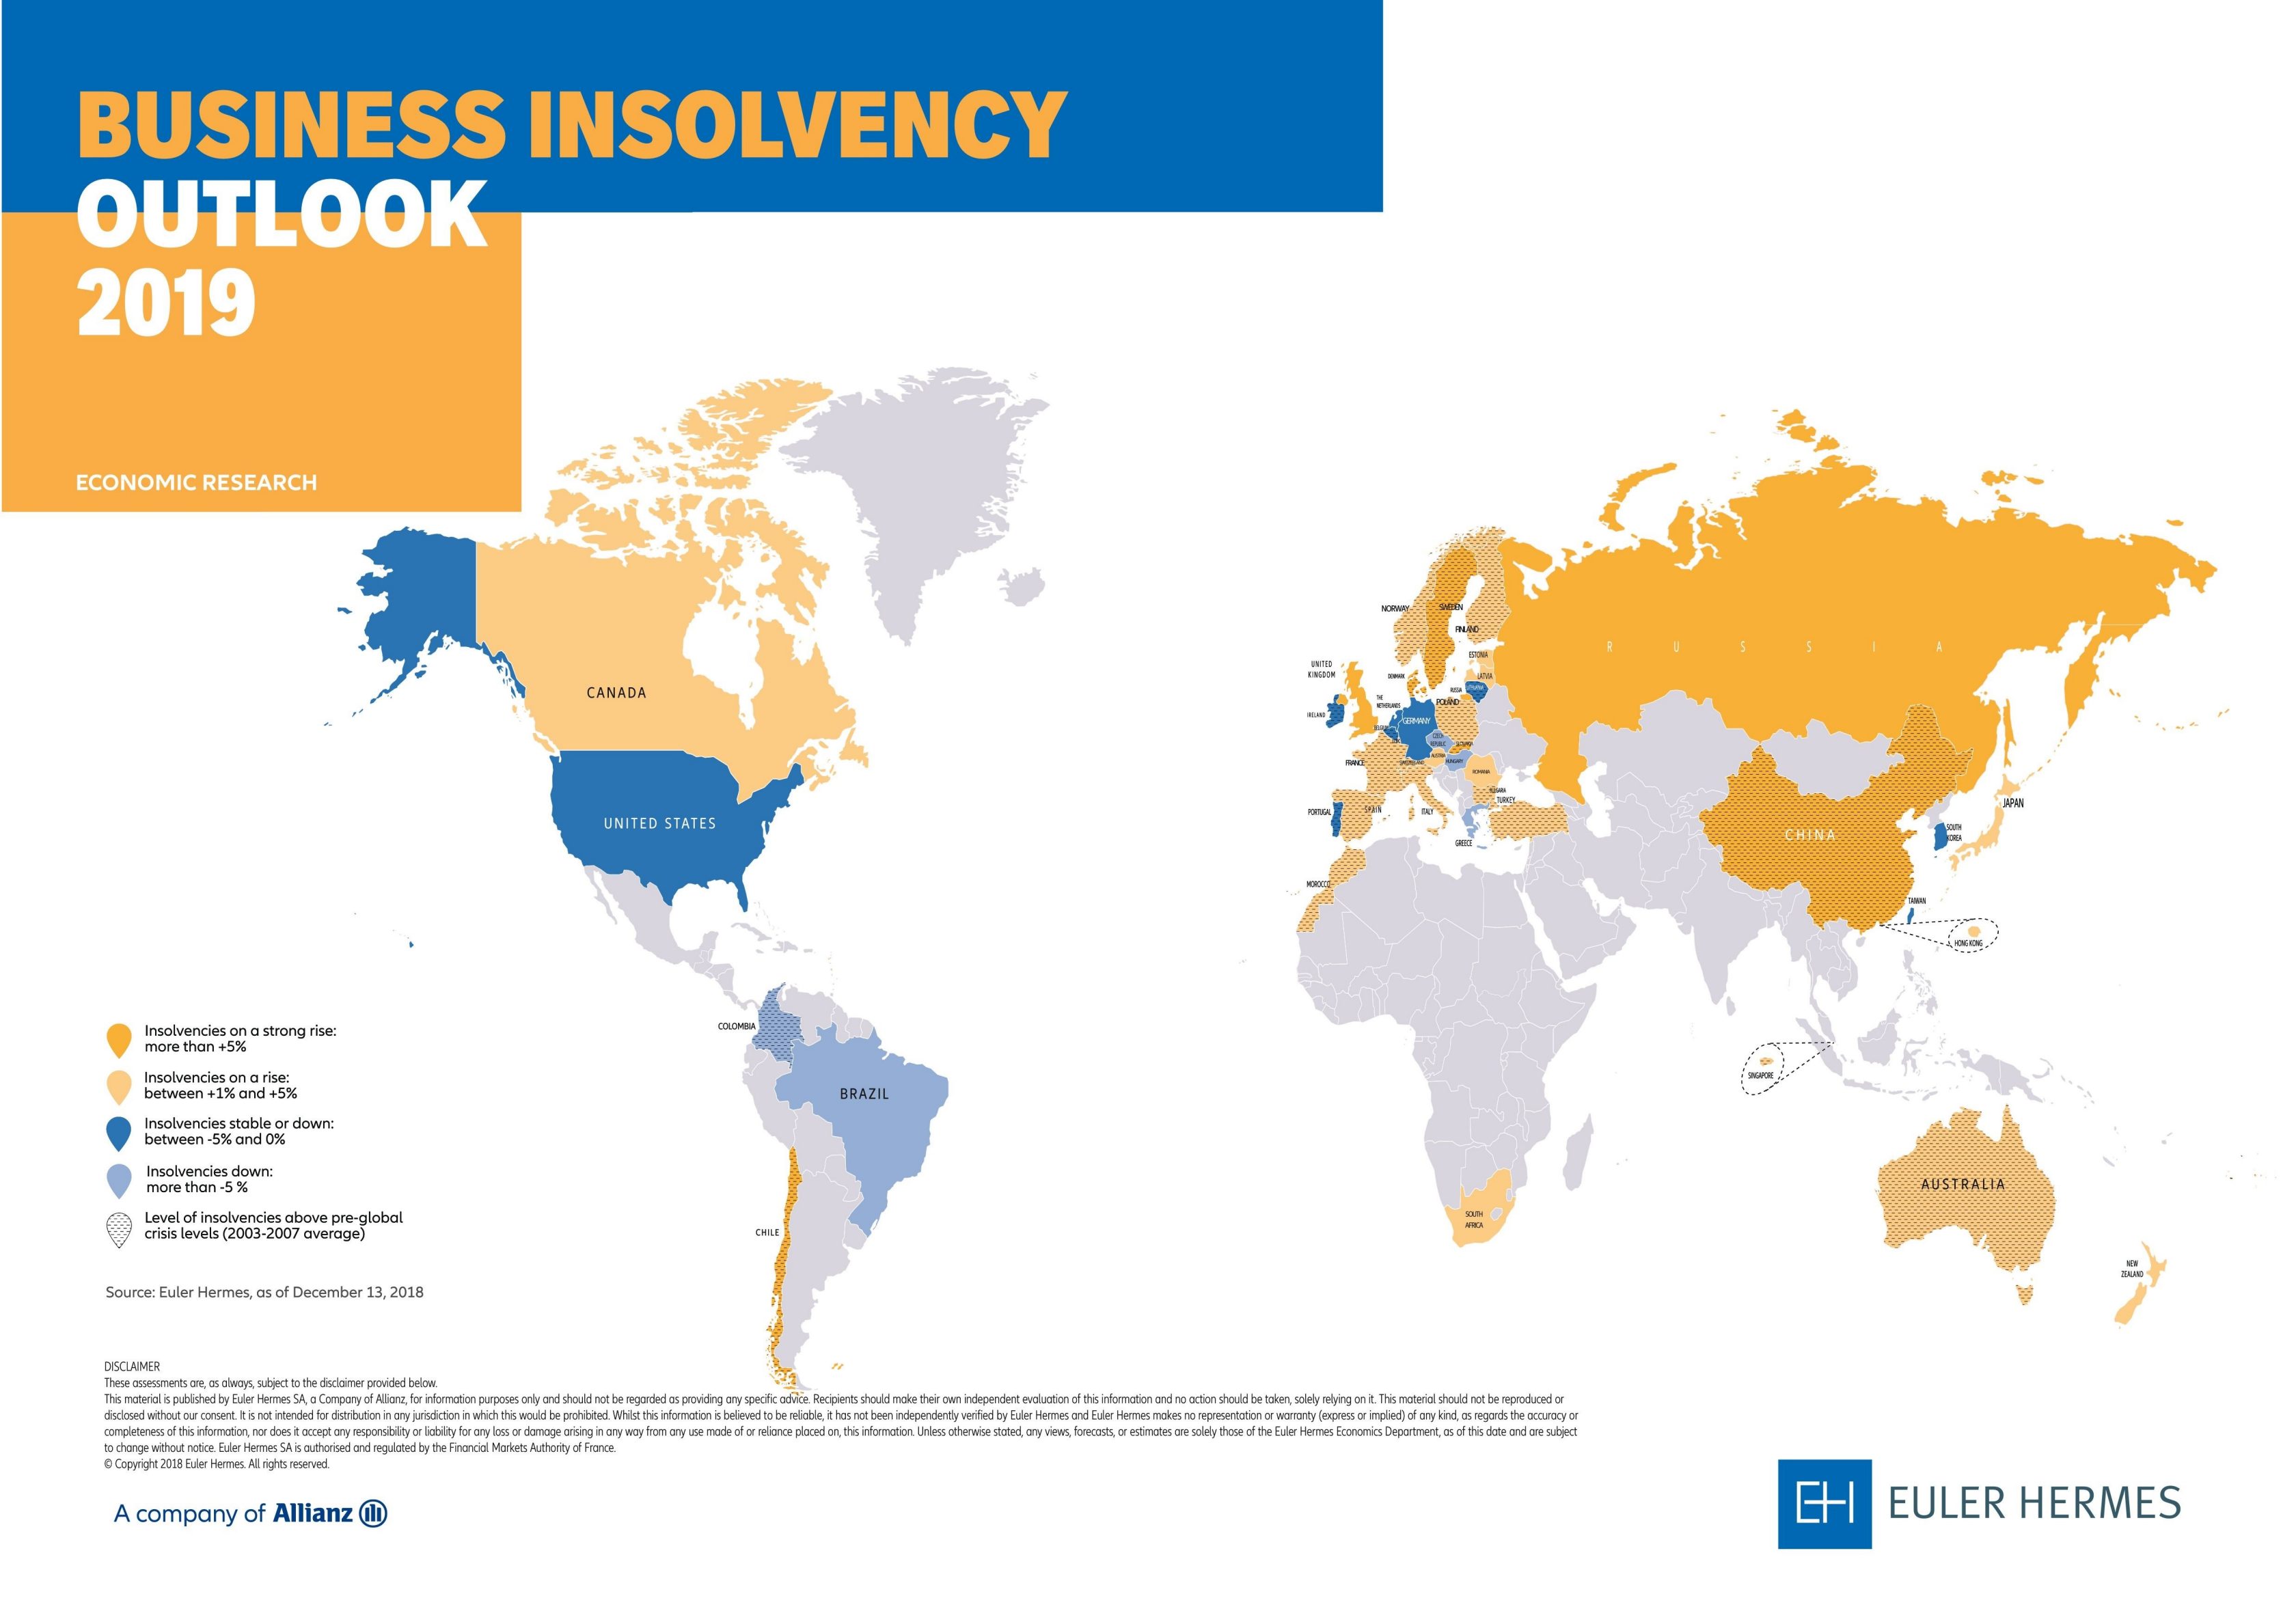 Global Insolvency Outlook 2019